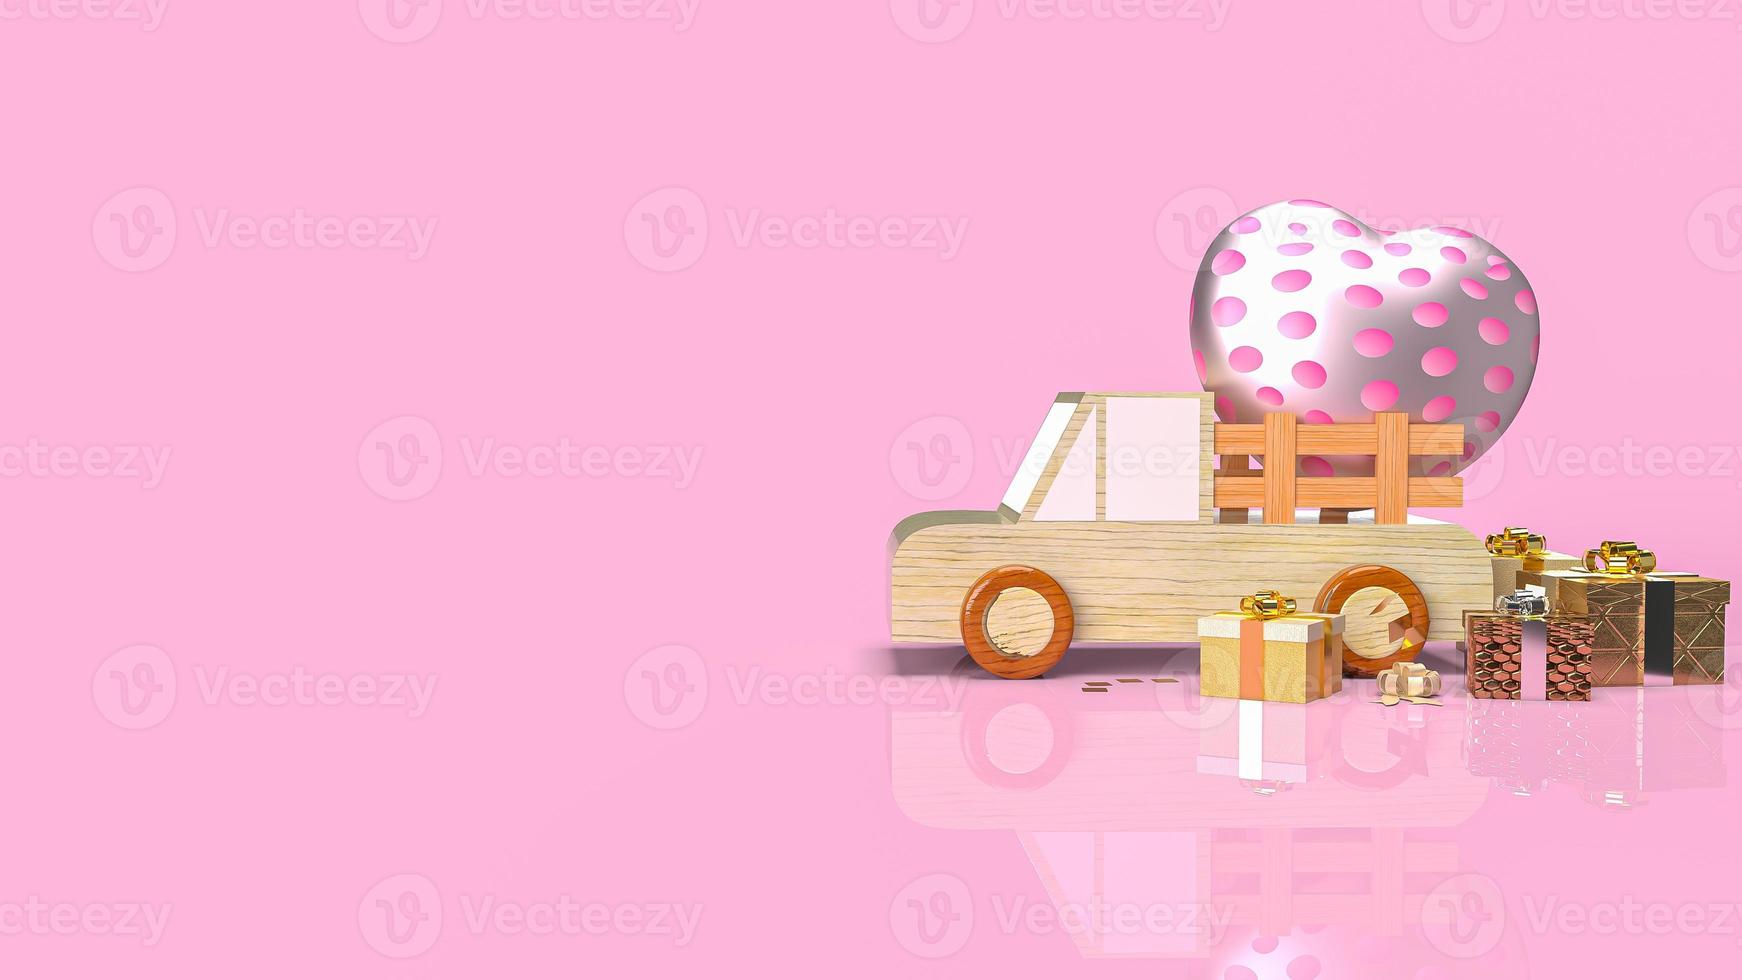 The heart and gift box on wood van truck for valentines day holiday content 3d rendering photo